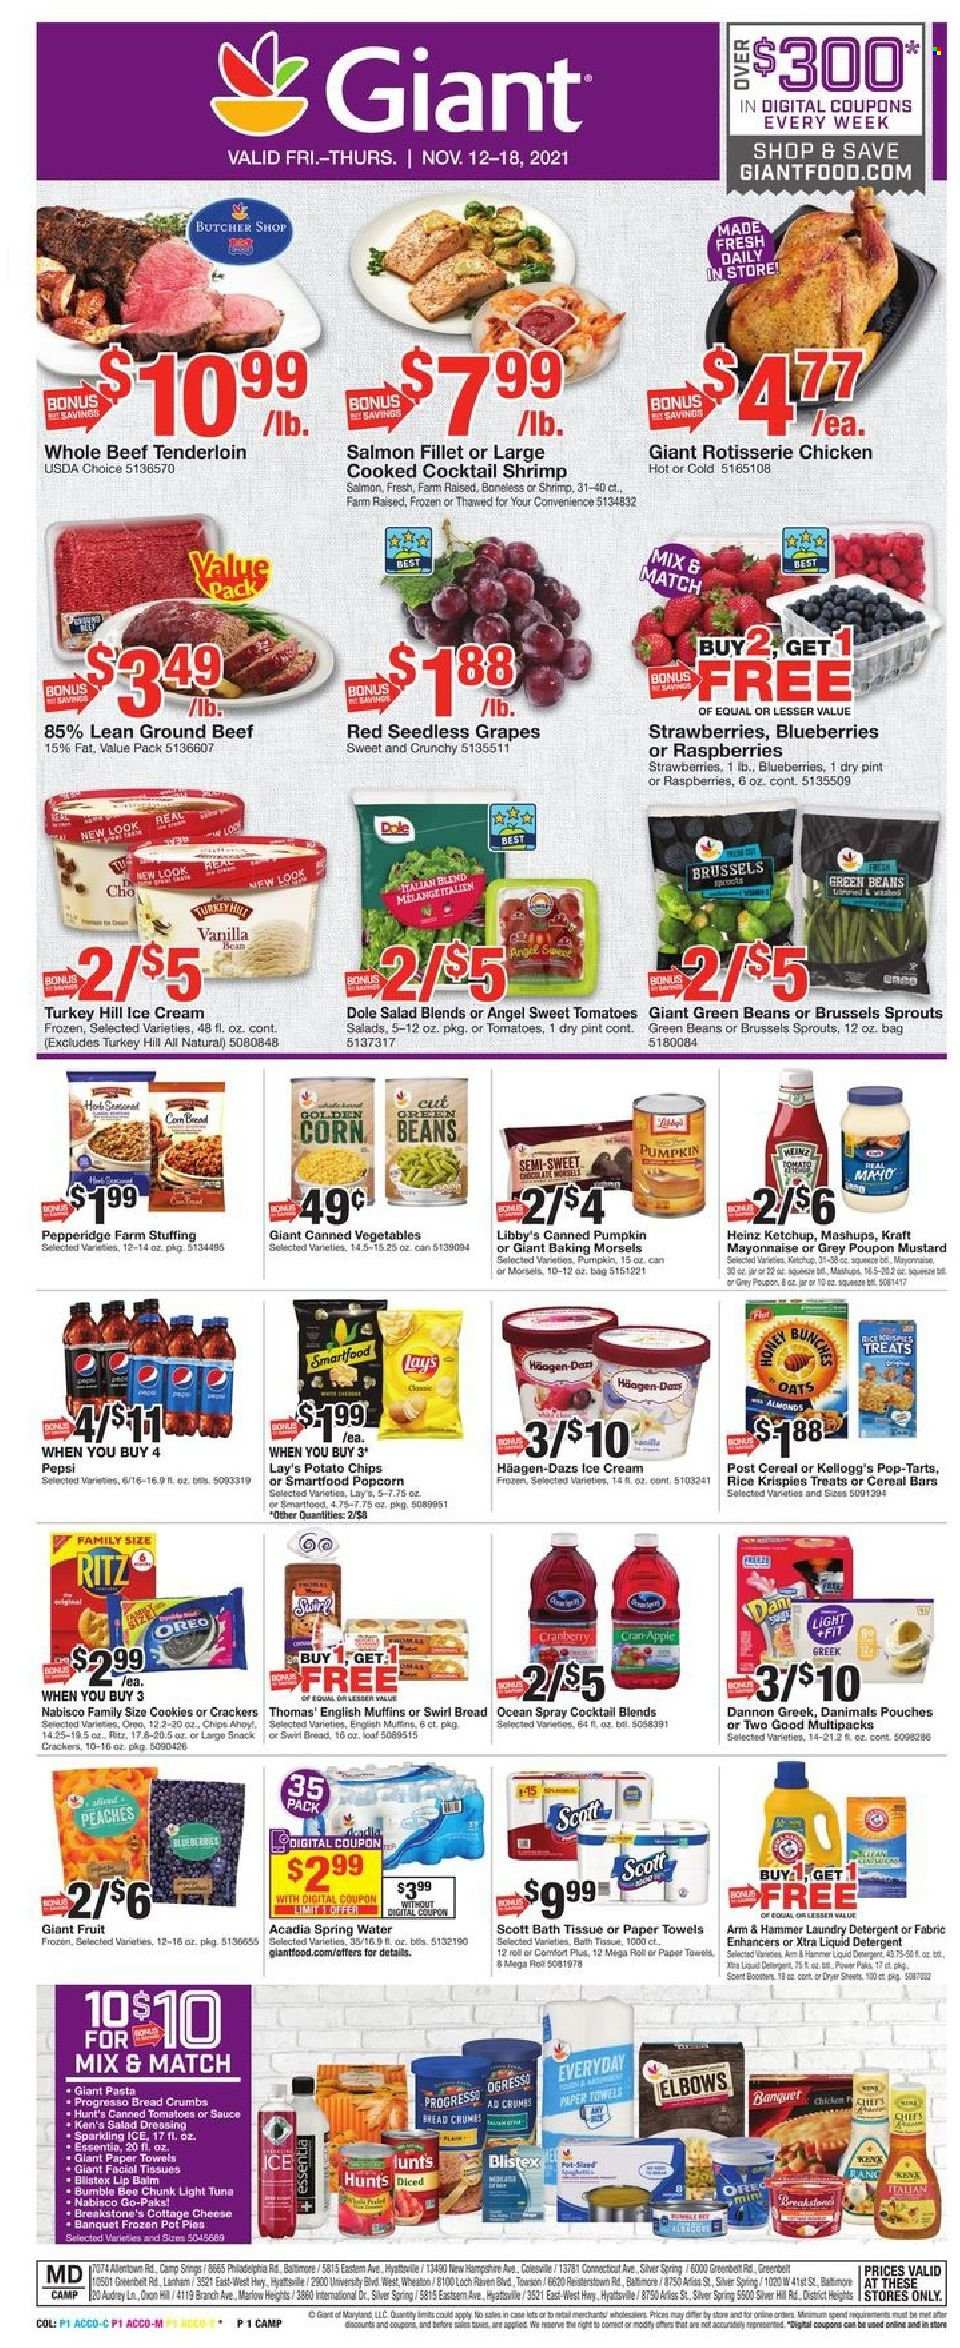 thumbnail - Giant Food Flyer - 11/12/2021 - 11/18/2021 - Sales products - seedless grapes, breadcrumbs, corn, green beans, Dole, brussel sprouts, blueberries, grapes, strawberries, salmon, salmon fillet, tuna, shrimps, chicken roast, pasta, Progresso, Kraft®, cottage cheese, Oreo, Dannon, Danimals, mayonnaise, ice cream, Häagen-Dazs, cookies, snack, cereal bar, crackers, Kellogg's, Pop-Tarts, RITZ, potato chips, Lay’s, Smartfood, popcorn, ARM & HAMMER, oats, Heinz, canned vegetables, light tuna, Rice Krispies, mustard, salad dressing, ketchup, dressing, Pepsi, spring water, Acadia, beef meat, ground beef, beef tenderloin, bath tissue, Scott, kitchen towels, paper towels, detergent, liquid detergent, laundry detergent, XTRA, lip balm, pot, jar, peaches. Page 1.